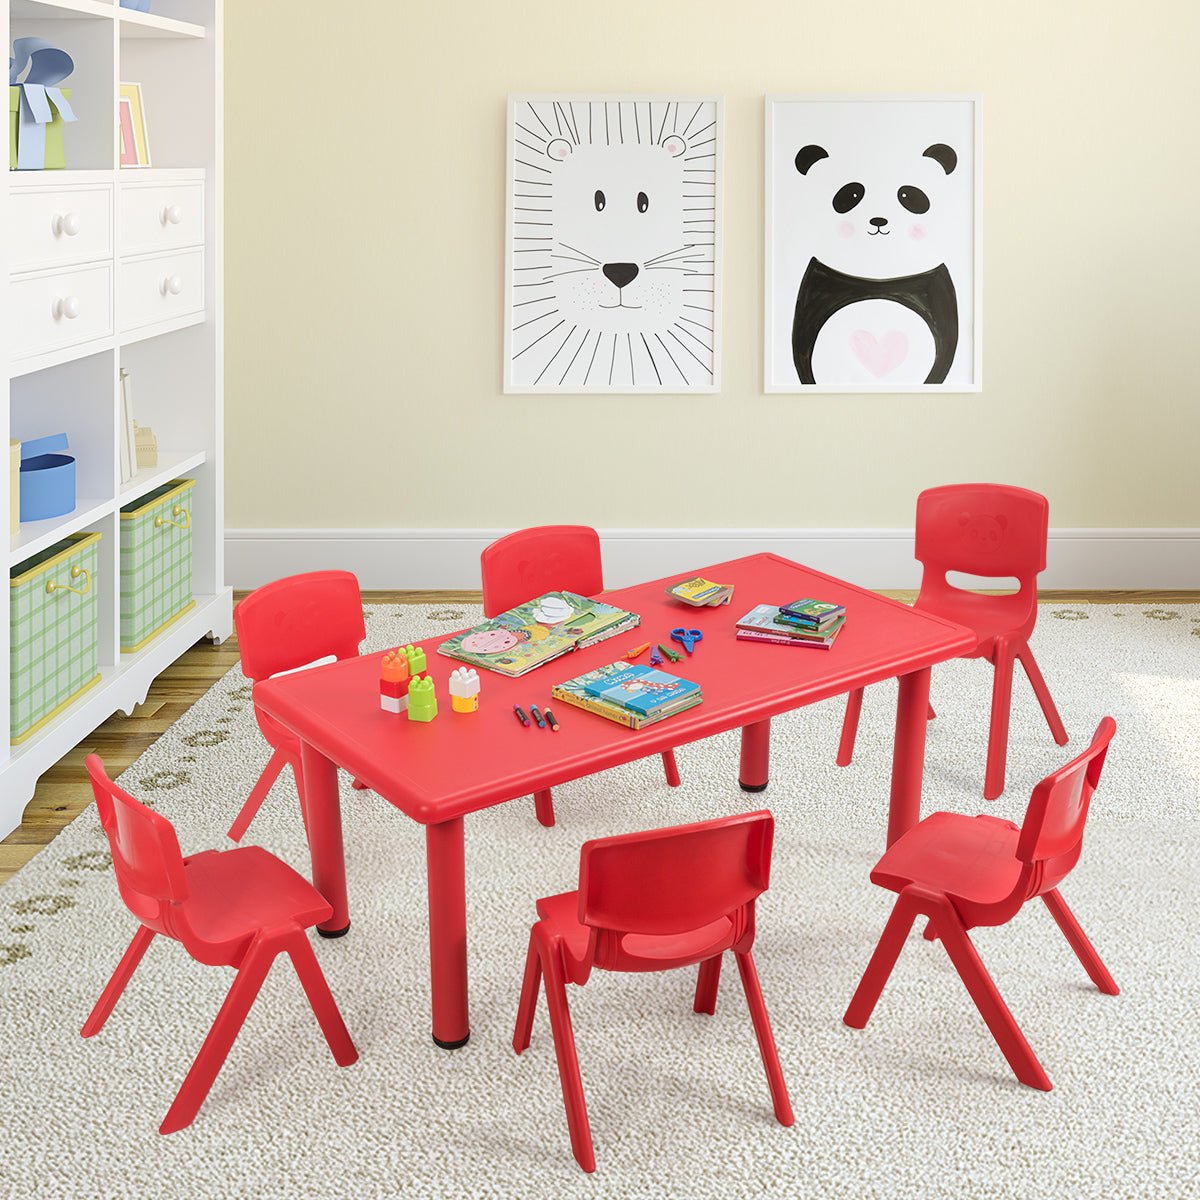 Children's Table and 6 Chairs Set - Ideal for Learning and Play